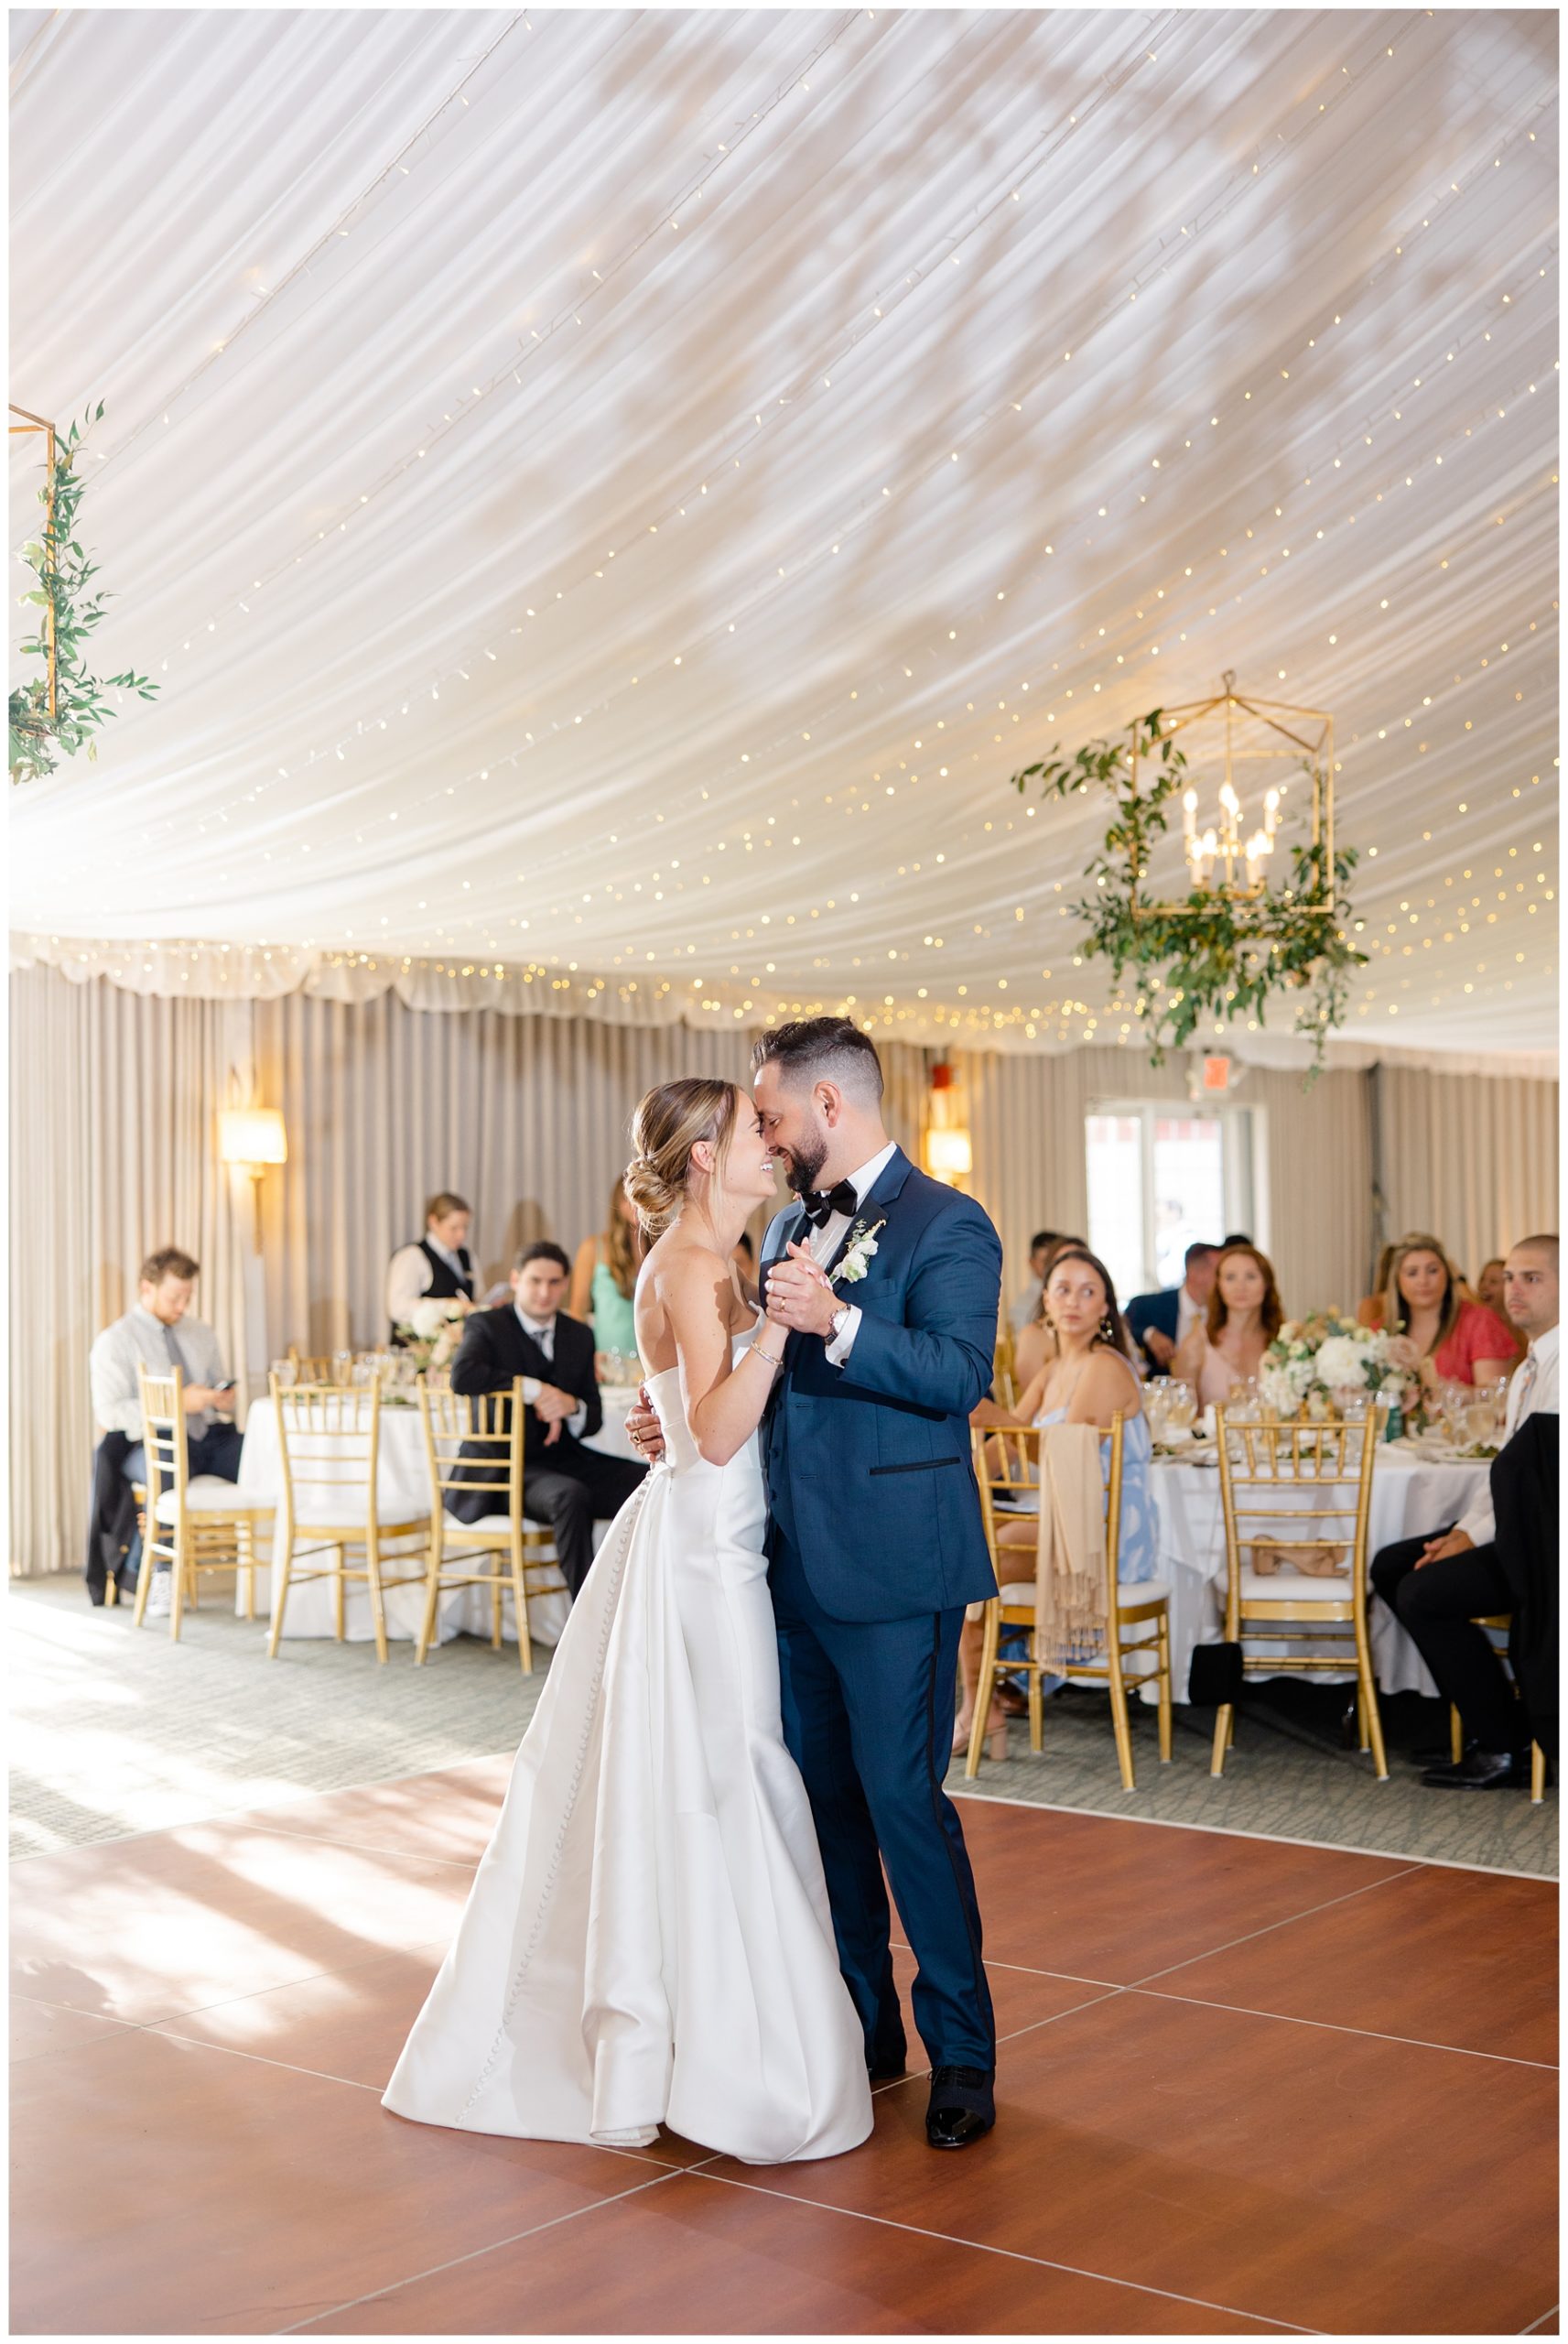 candid moment of bride and groom on dance floor